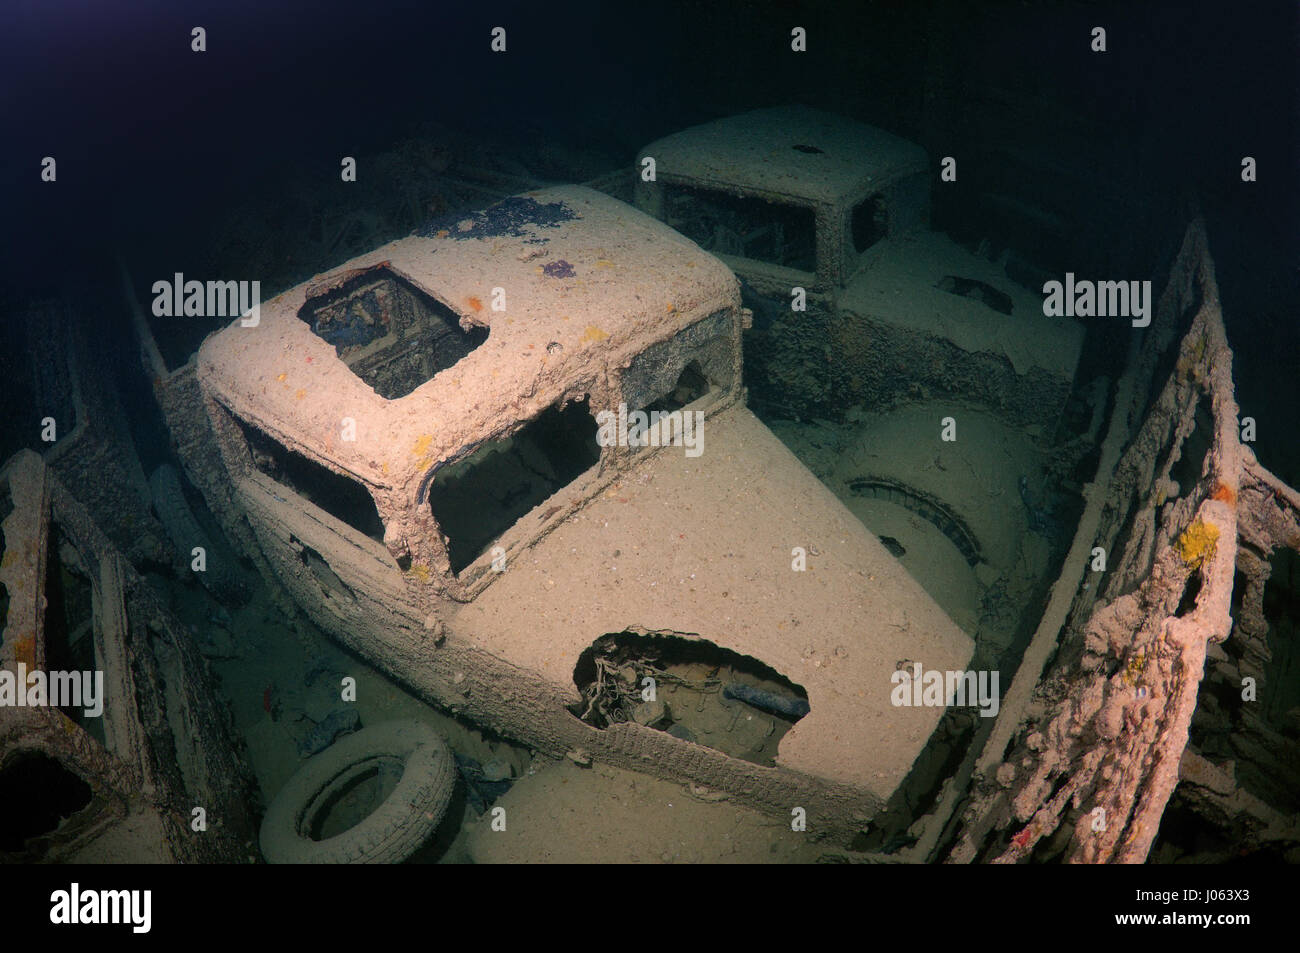 The trucks that were being carried when the ship sunk. EERIE underwater pictures show inside the wreckage of the sunken British World War Two ship SS Thistlegorm on the seventy-fifth anniversary of her sinking. The series of images show the rusted remains of the merchant navy ship’s cargo which includes motorbikes, army trucks and an aircraft propeller. Other pictures show how sea life have been inhabiting the wreckage. Stock Photo